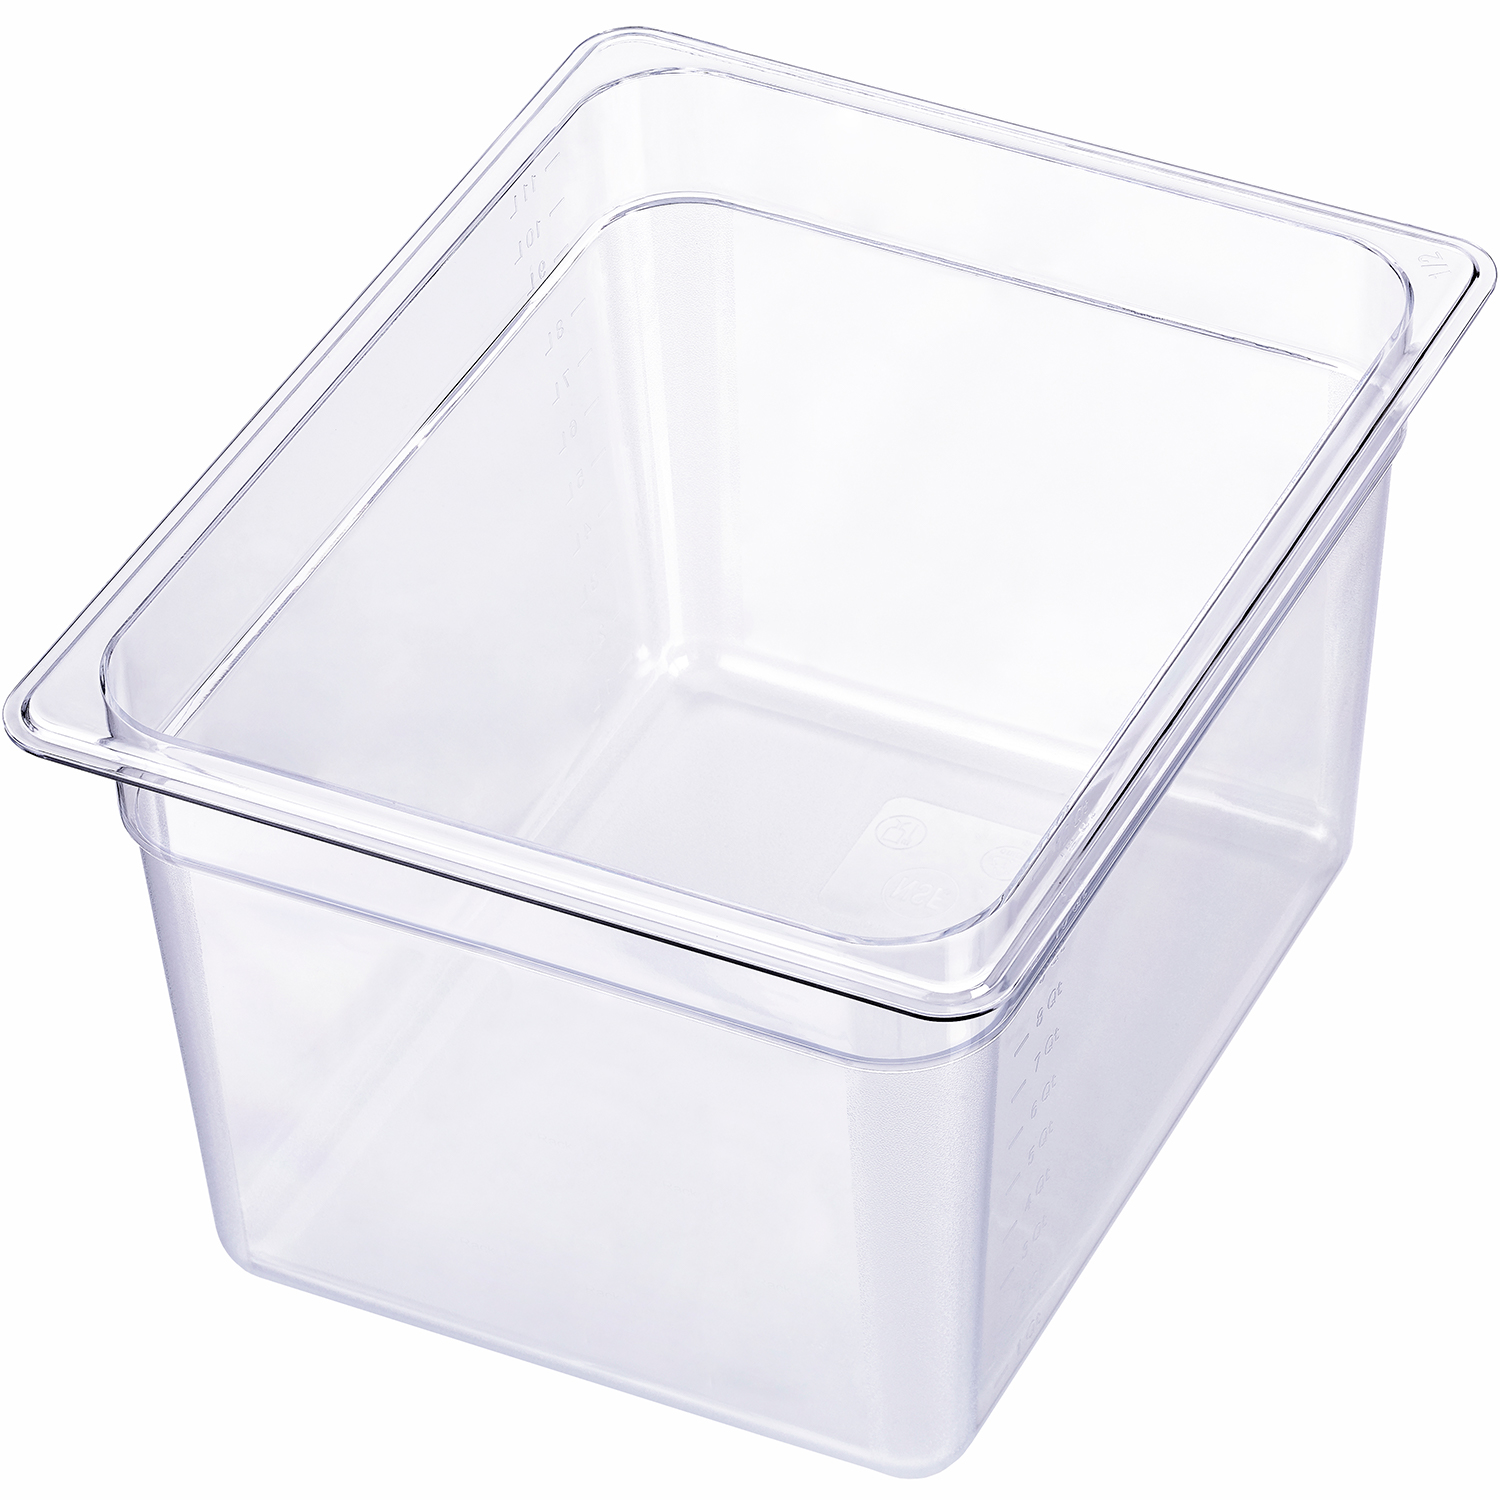 Matching L10 rack and tailored lids for many circulators sold separately LIPAVI Sous-Vide-Container Model C10 | 12.7 x 10.3 Inch 13,6 Liter L: 32,3 x B:26,2 x H:20 cm